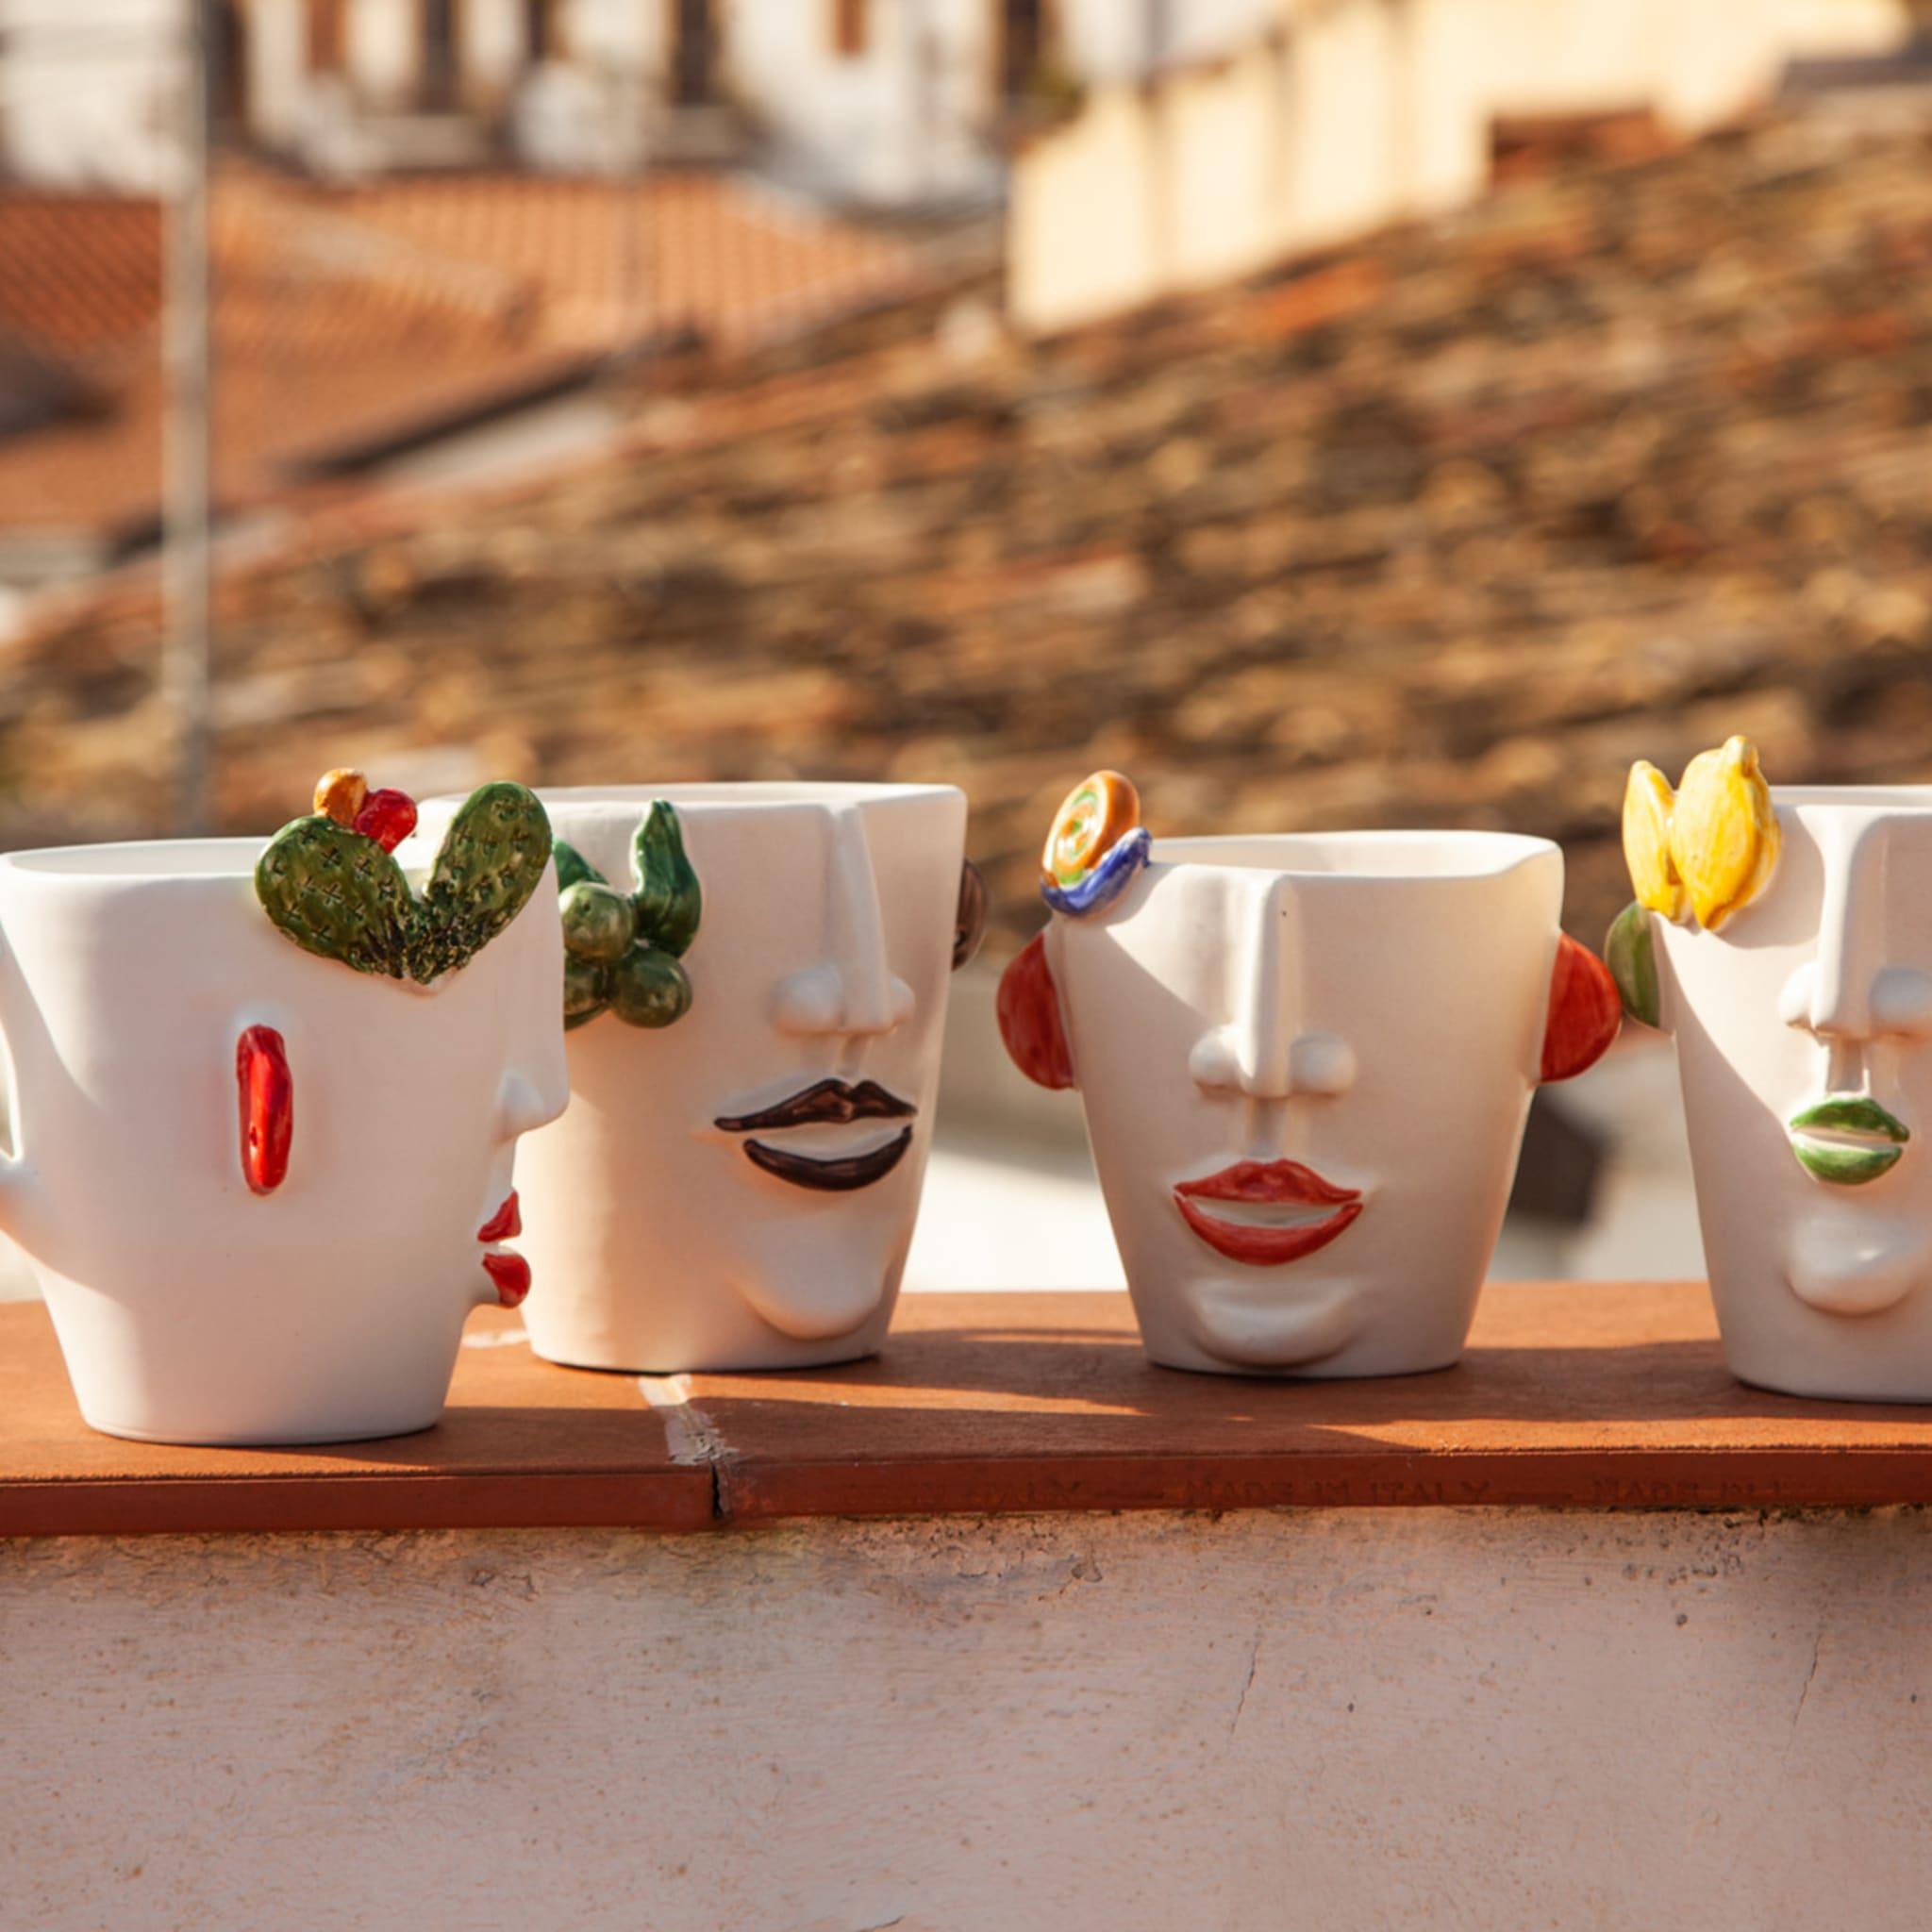 This outstanding set of three ceramic mugs glazed in matte white belongs to a creative series of pieces handcrafted by Patrizia Italiano to celebrate different types of Sicilian street vendors. Dedicated to Carmelina - seller of prickly pears - the